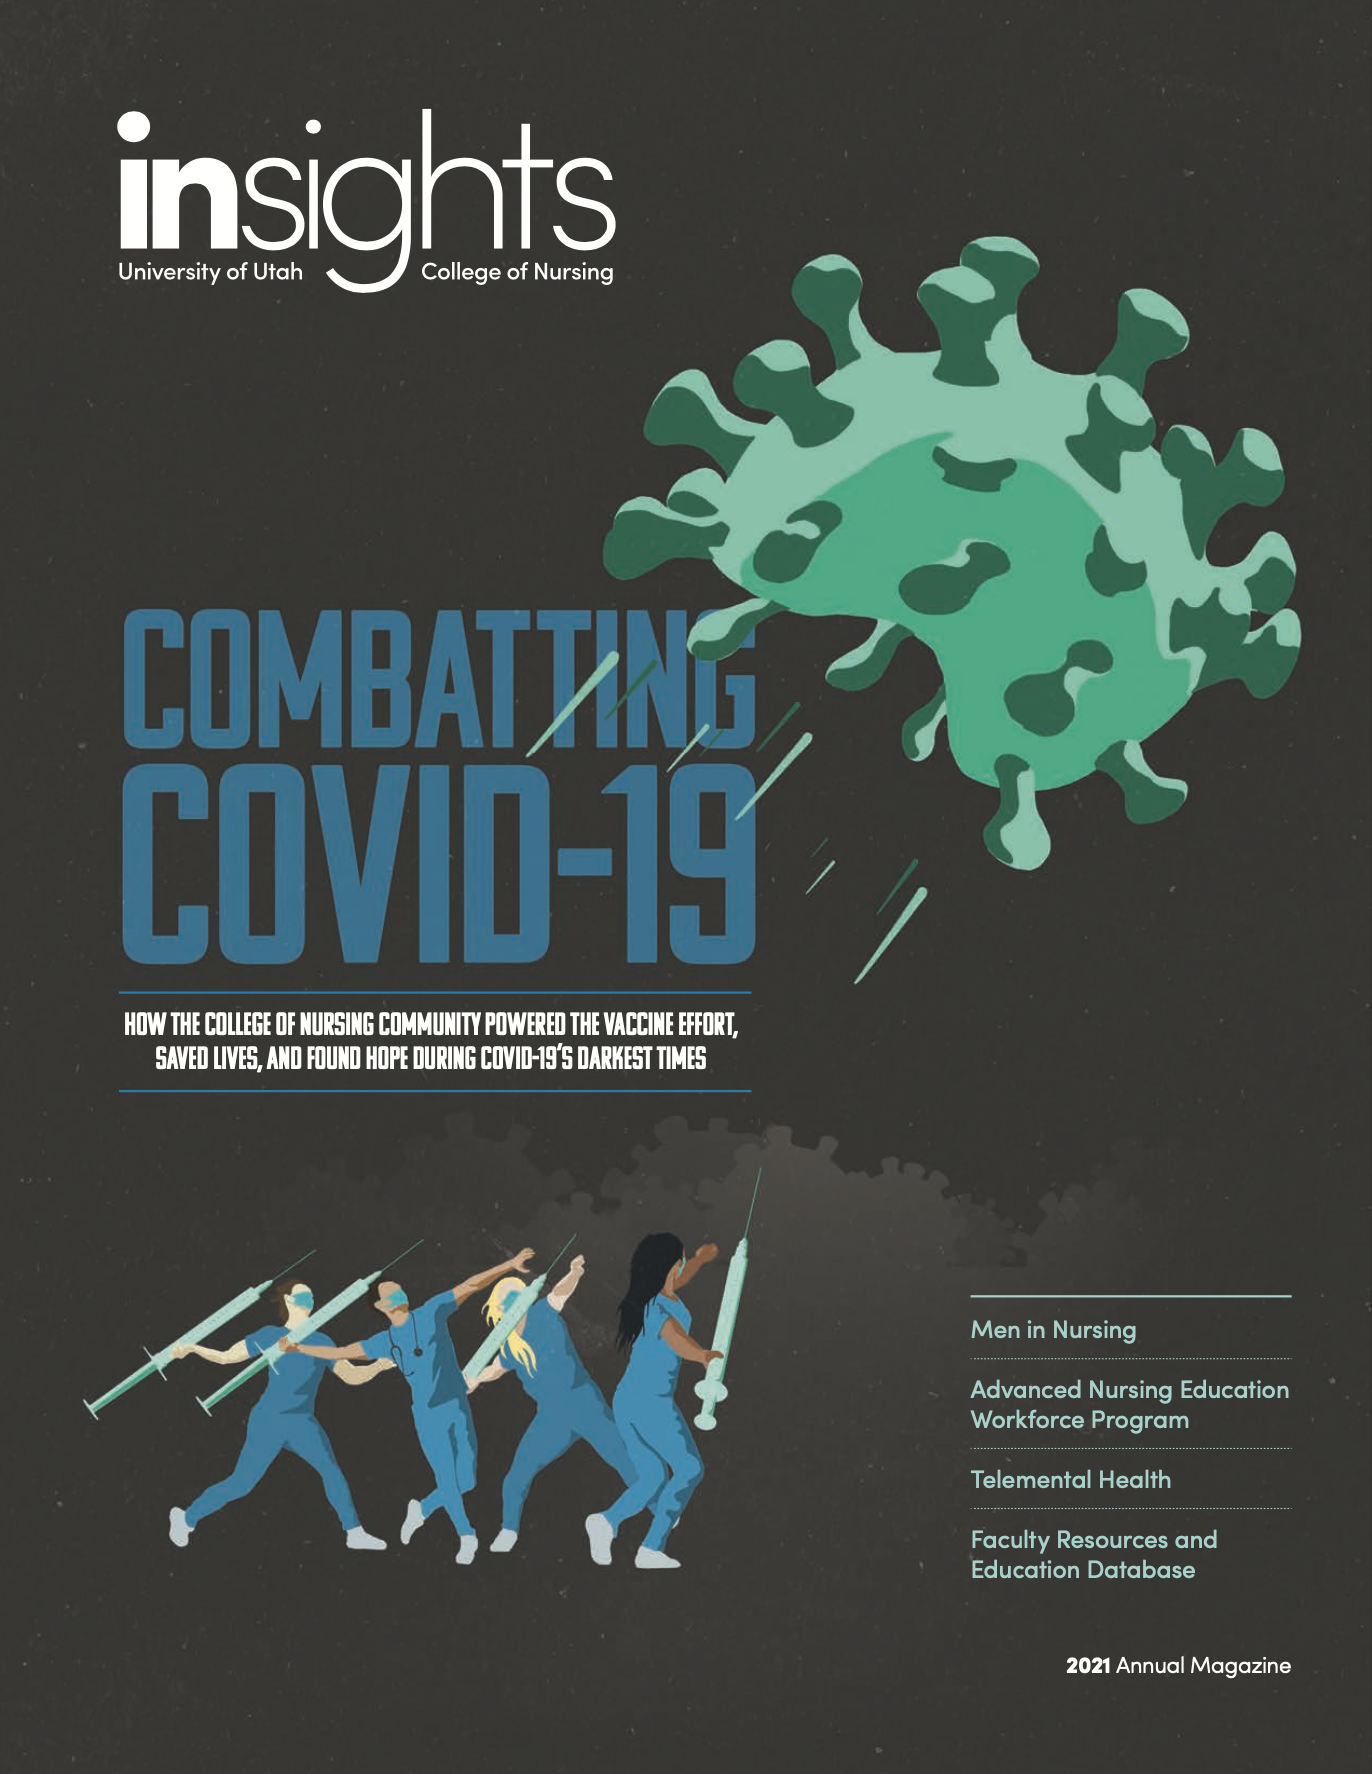 College of Nursing Insights Magazine 2021 Cover